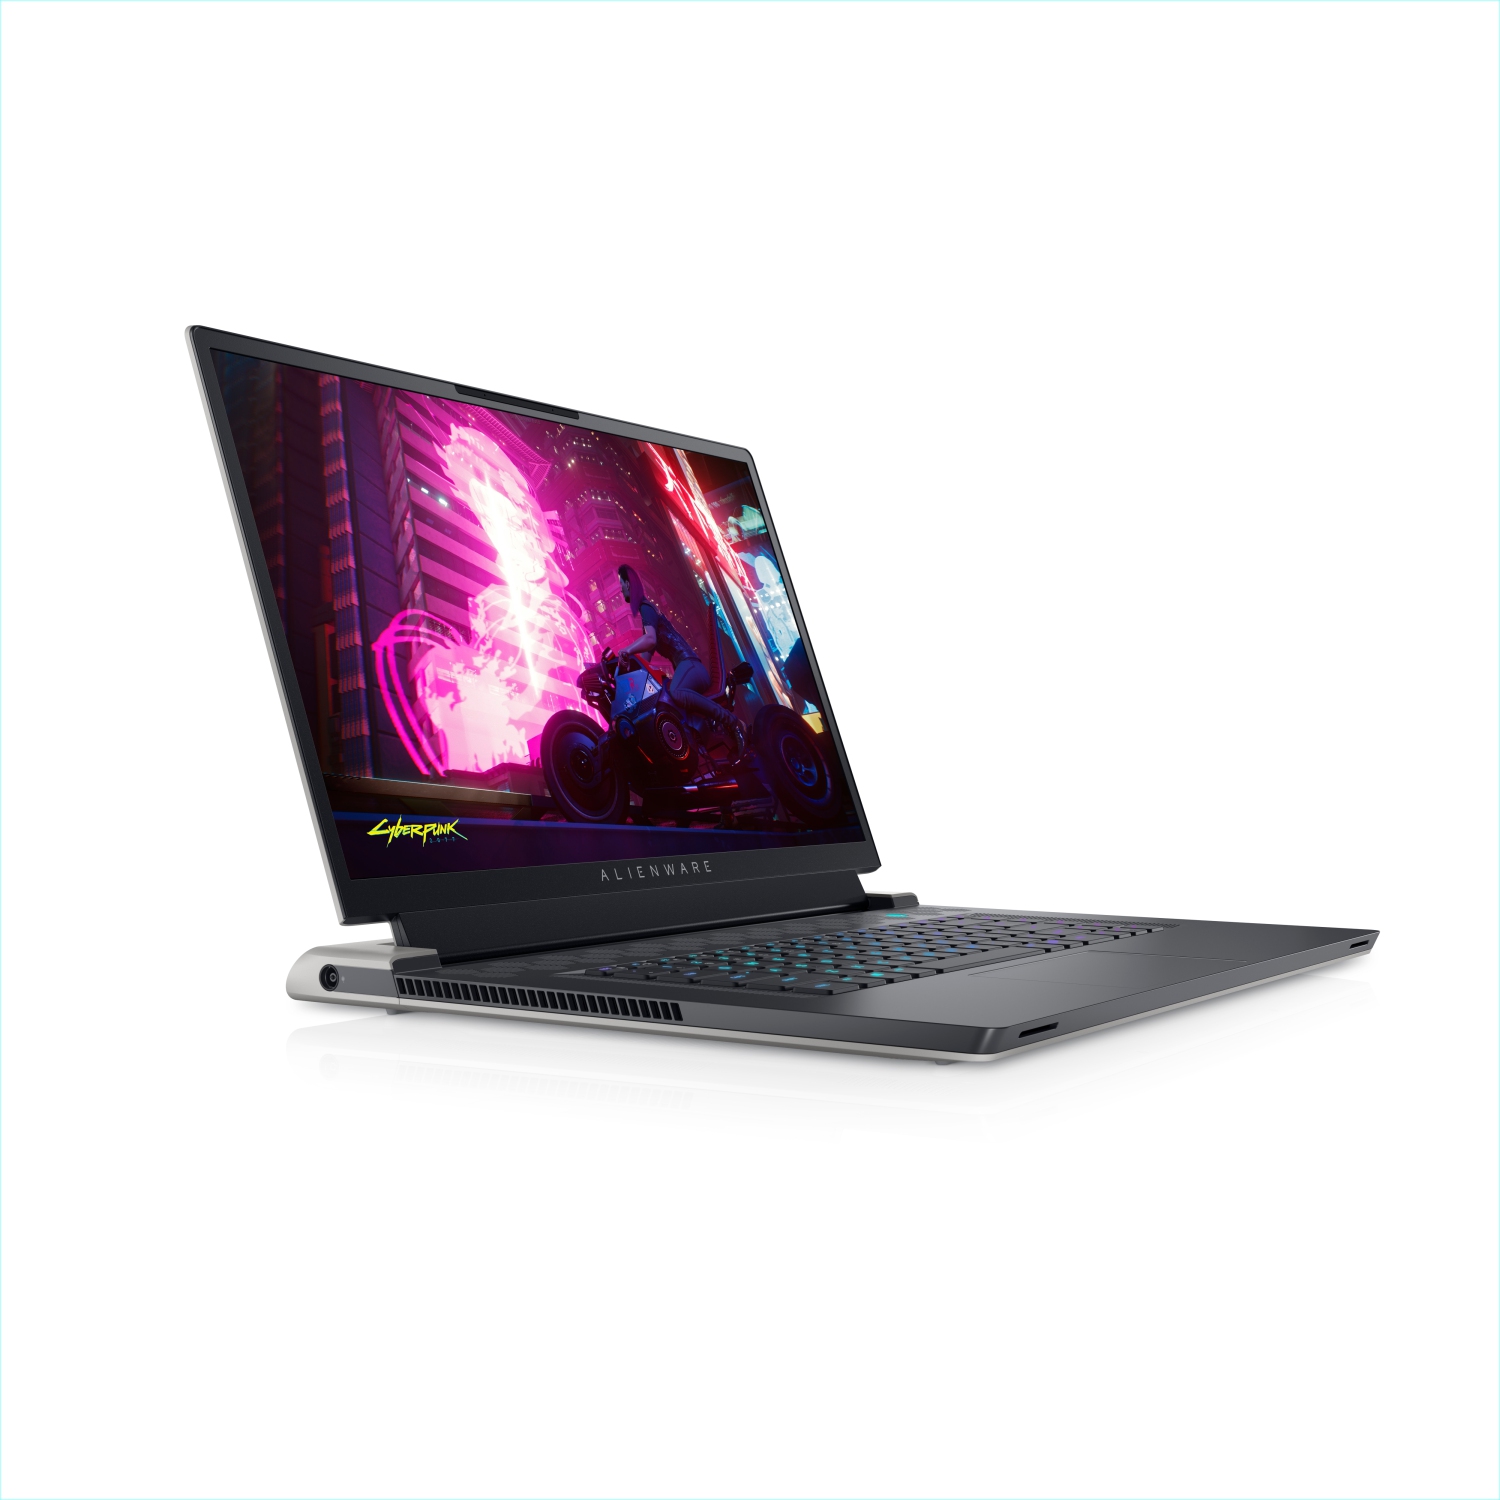 Refurbished (Excellent) - Dell Alienware X17 R1 Gaming Laptop (2021), 17.3" FHD, Core i7, 2TB SSD, 64GB RAM, RTX 3080, 8 Cores @ 4.6 GHz, 11th Gen CPU Certified